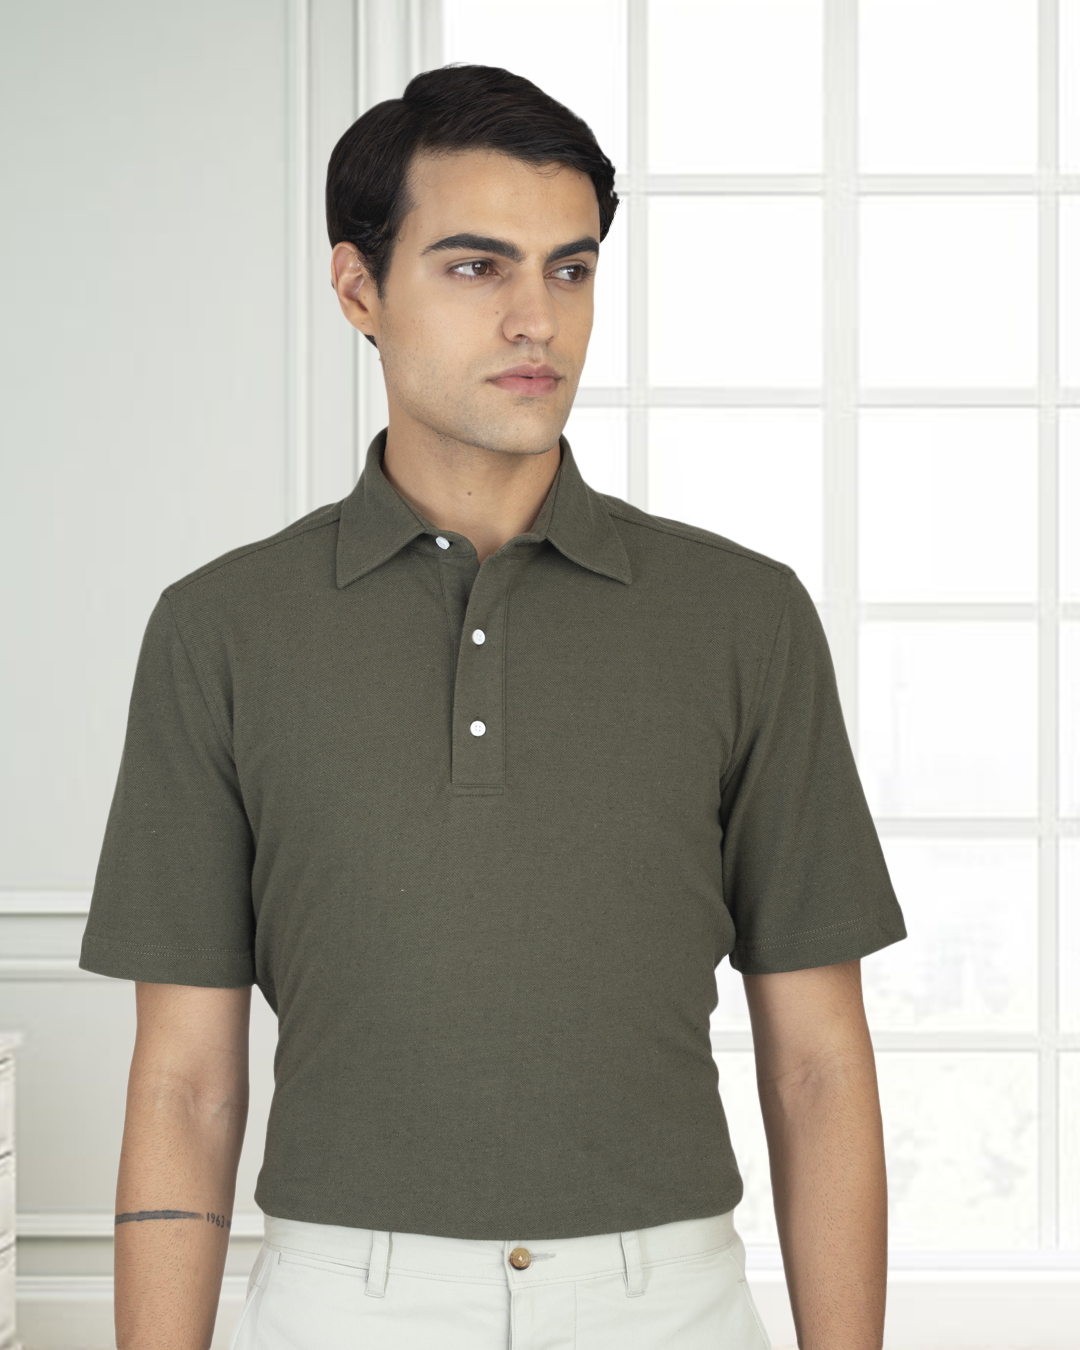 Front of model wearing the custom oxford polo shirt for men by Luxire in olive green